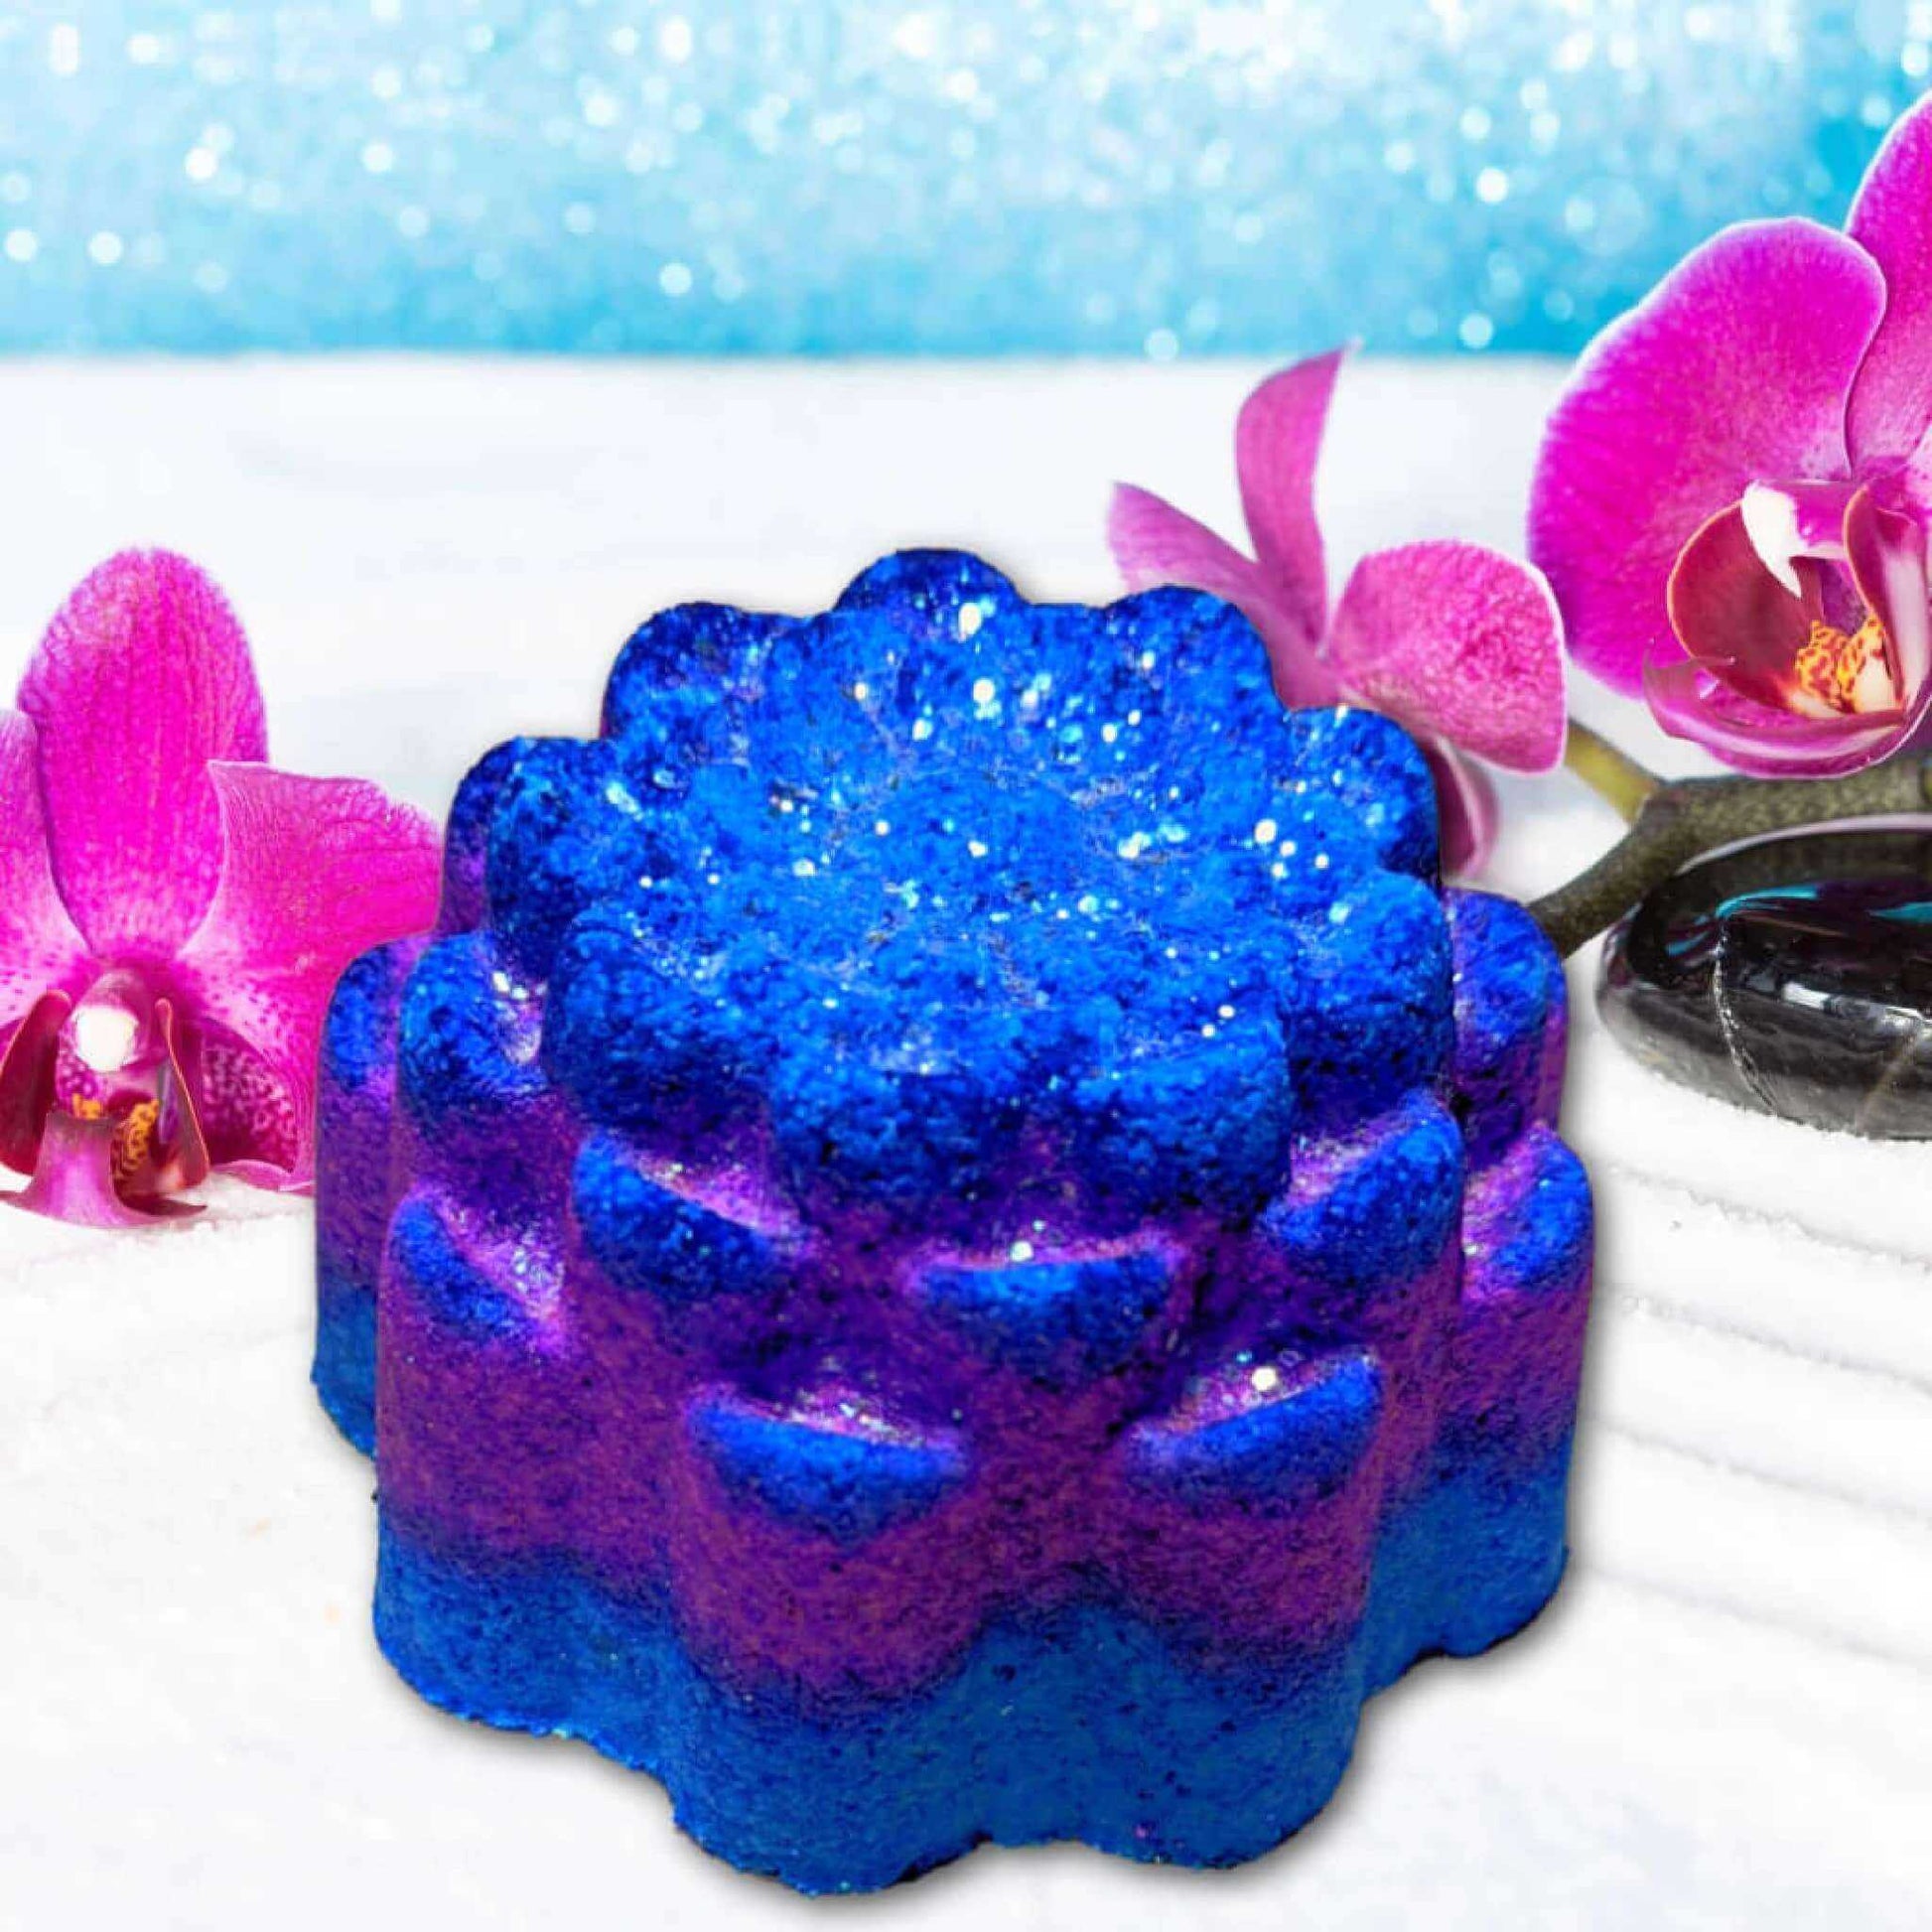 Immerse in tranquility with Desert Spa Fizzy Bath Bombs. Ultimate relaxation just a bath away!